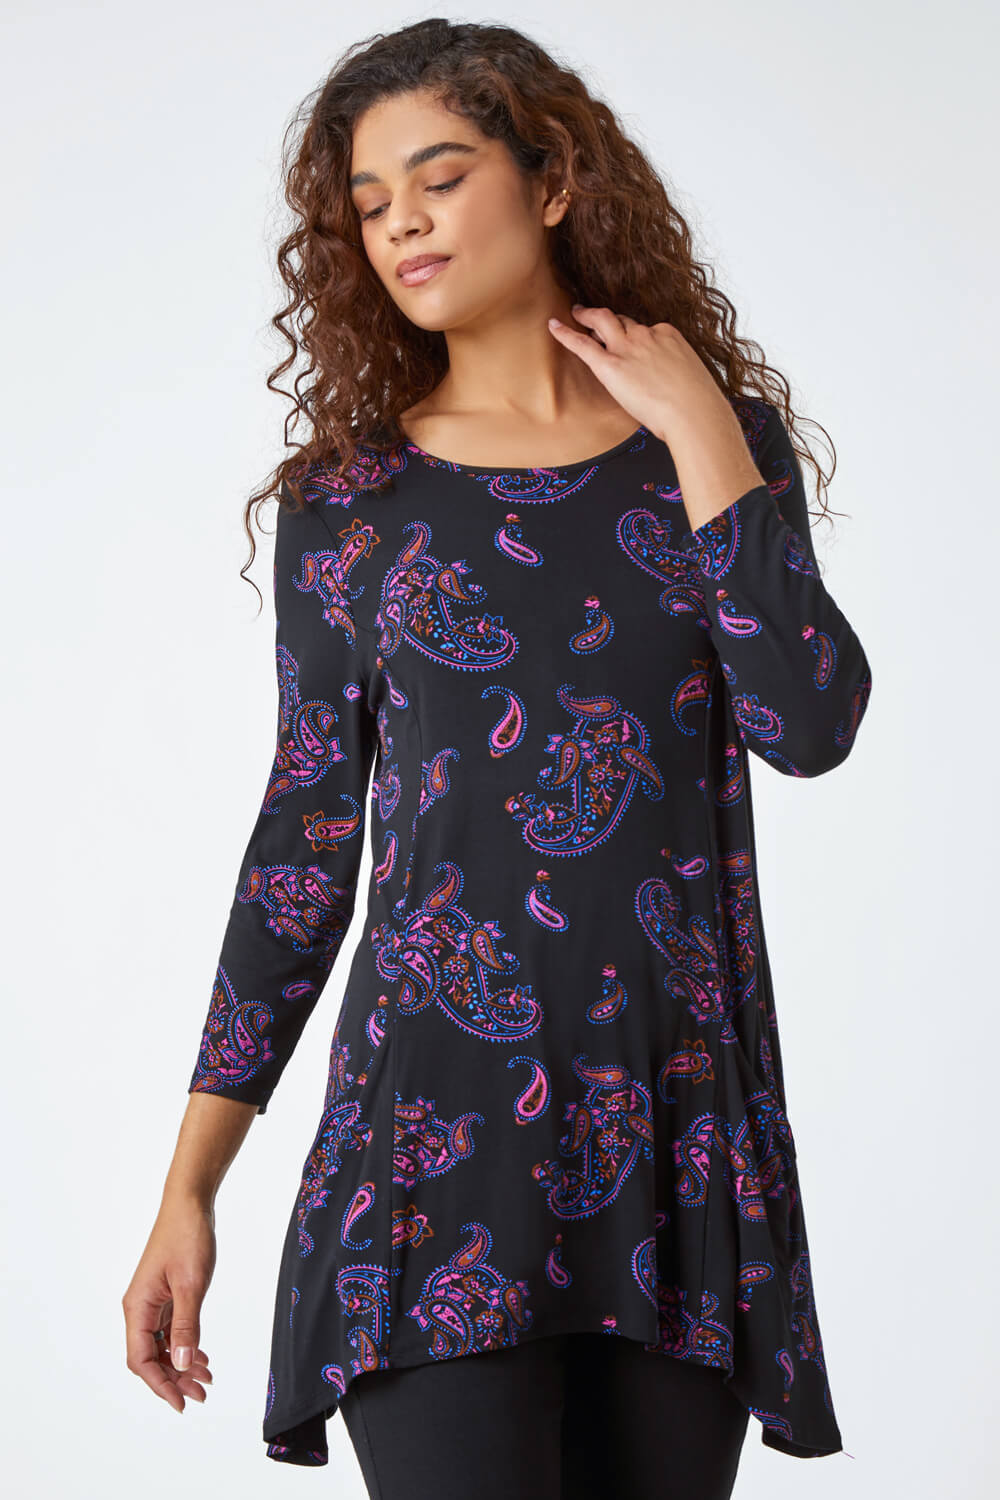 Purple Paisley Pocket Detail Stretch Swing Top, Image 1 of 5